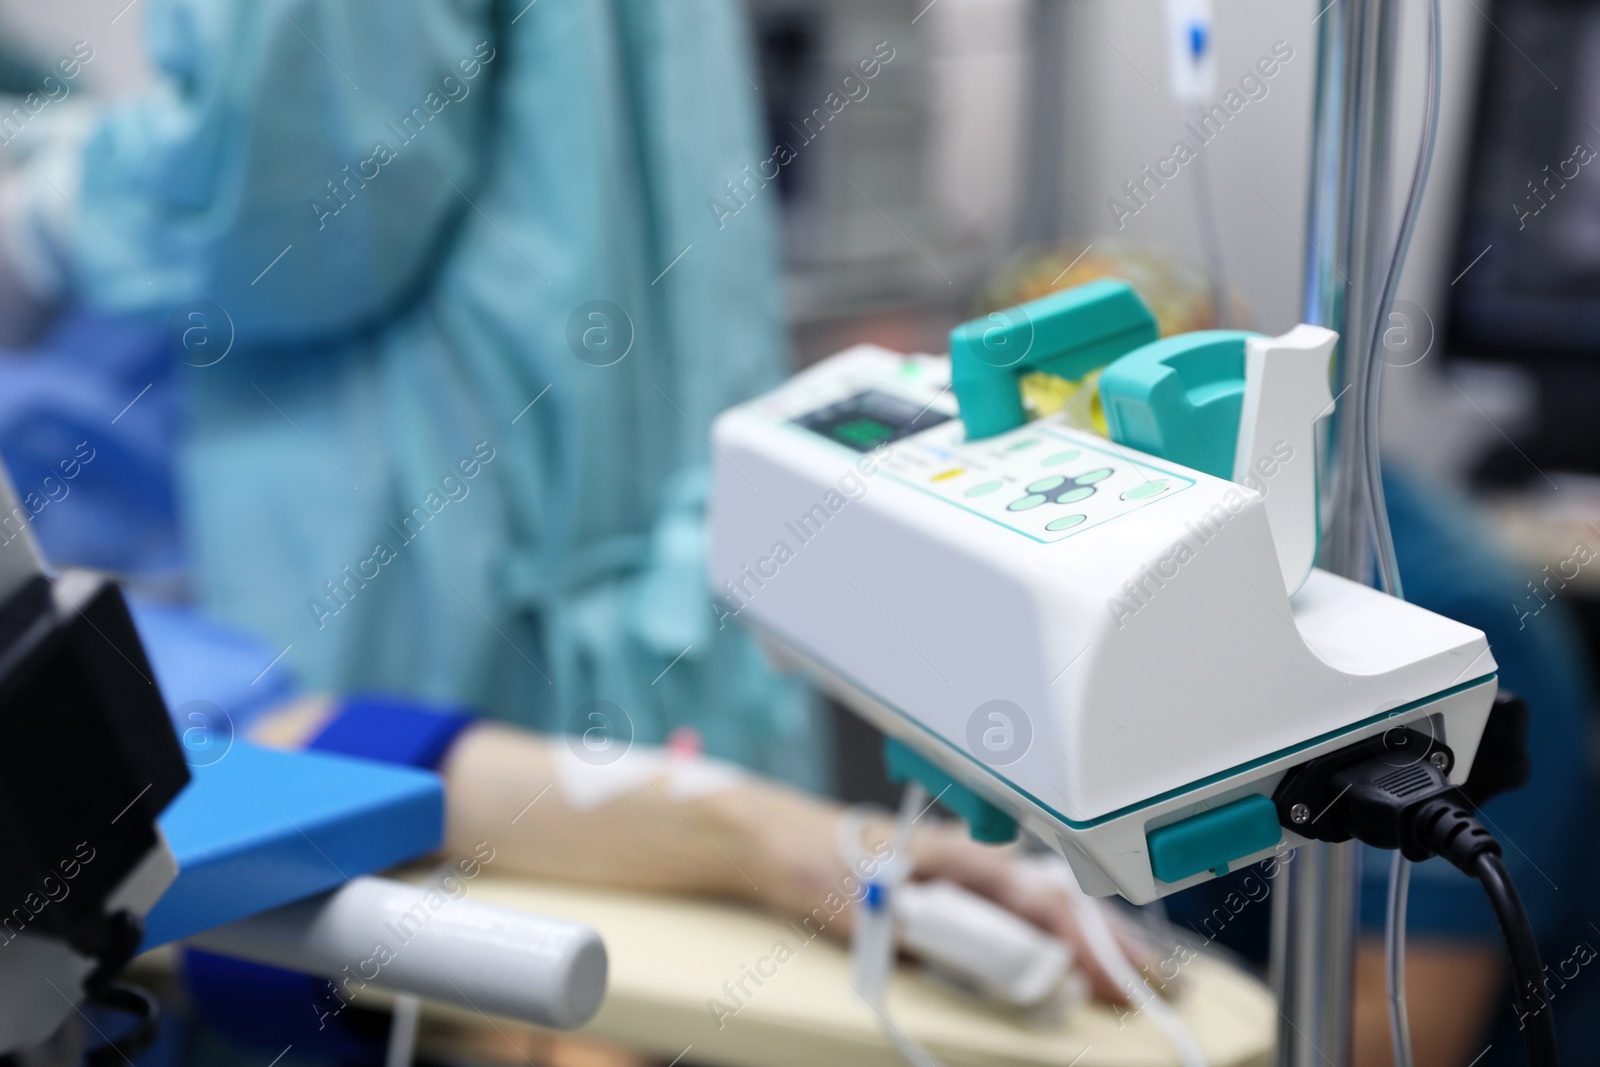 Photo of Medical equipment and blurred doctors in surgery room